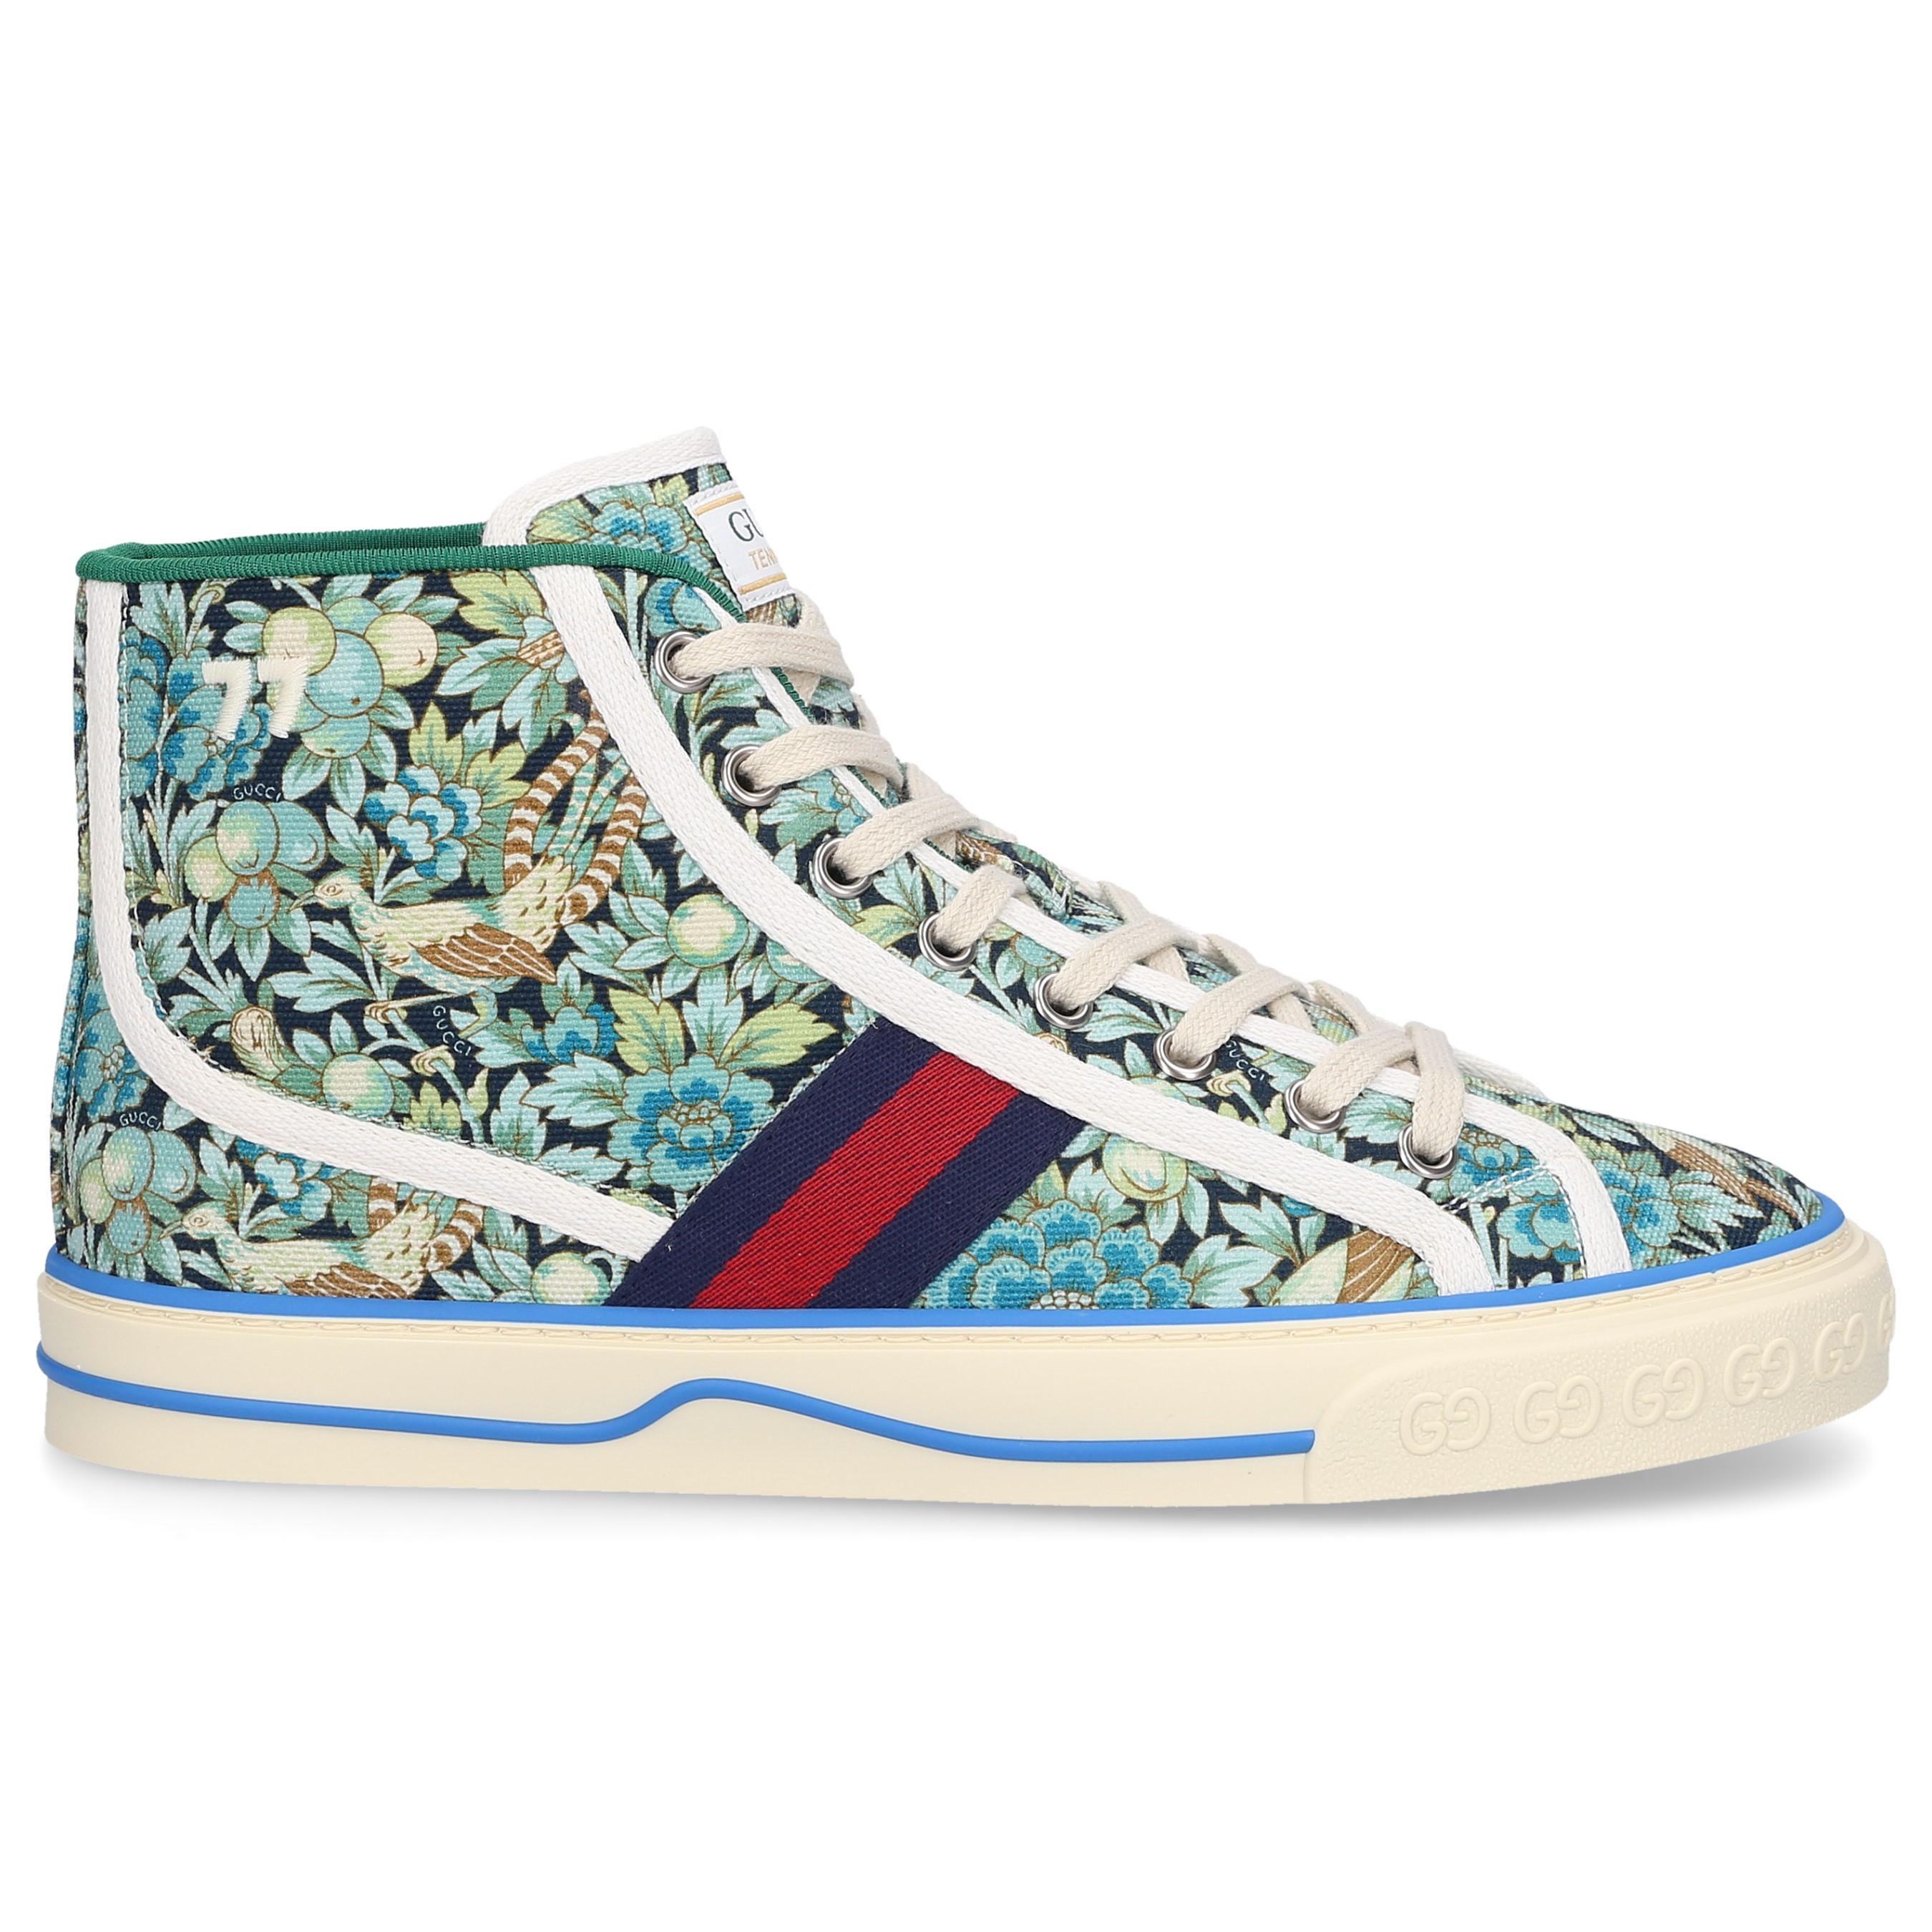 Gucci Canvas High-top Sneakers Tennis 1977 in Green - Lyst